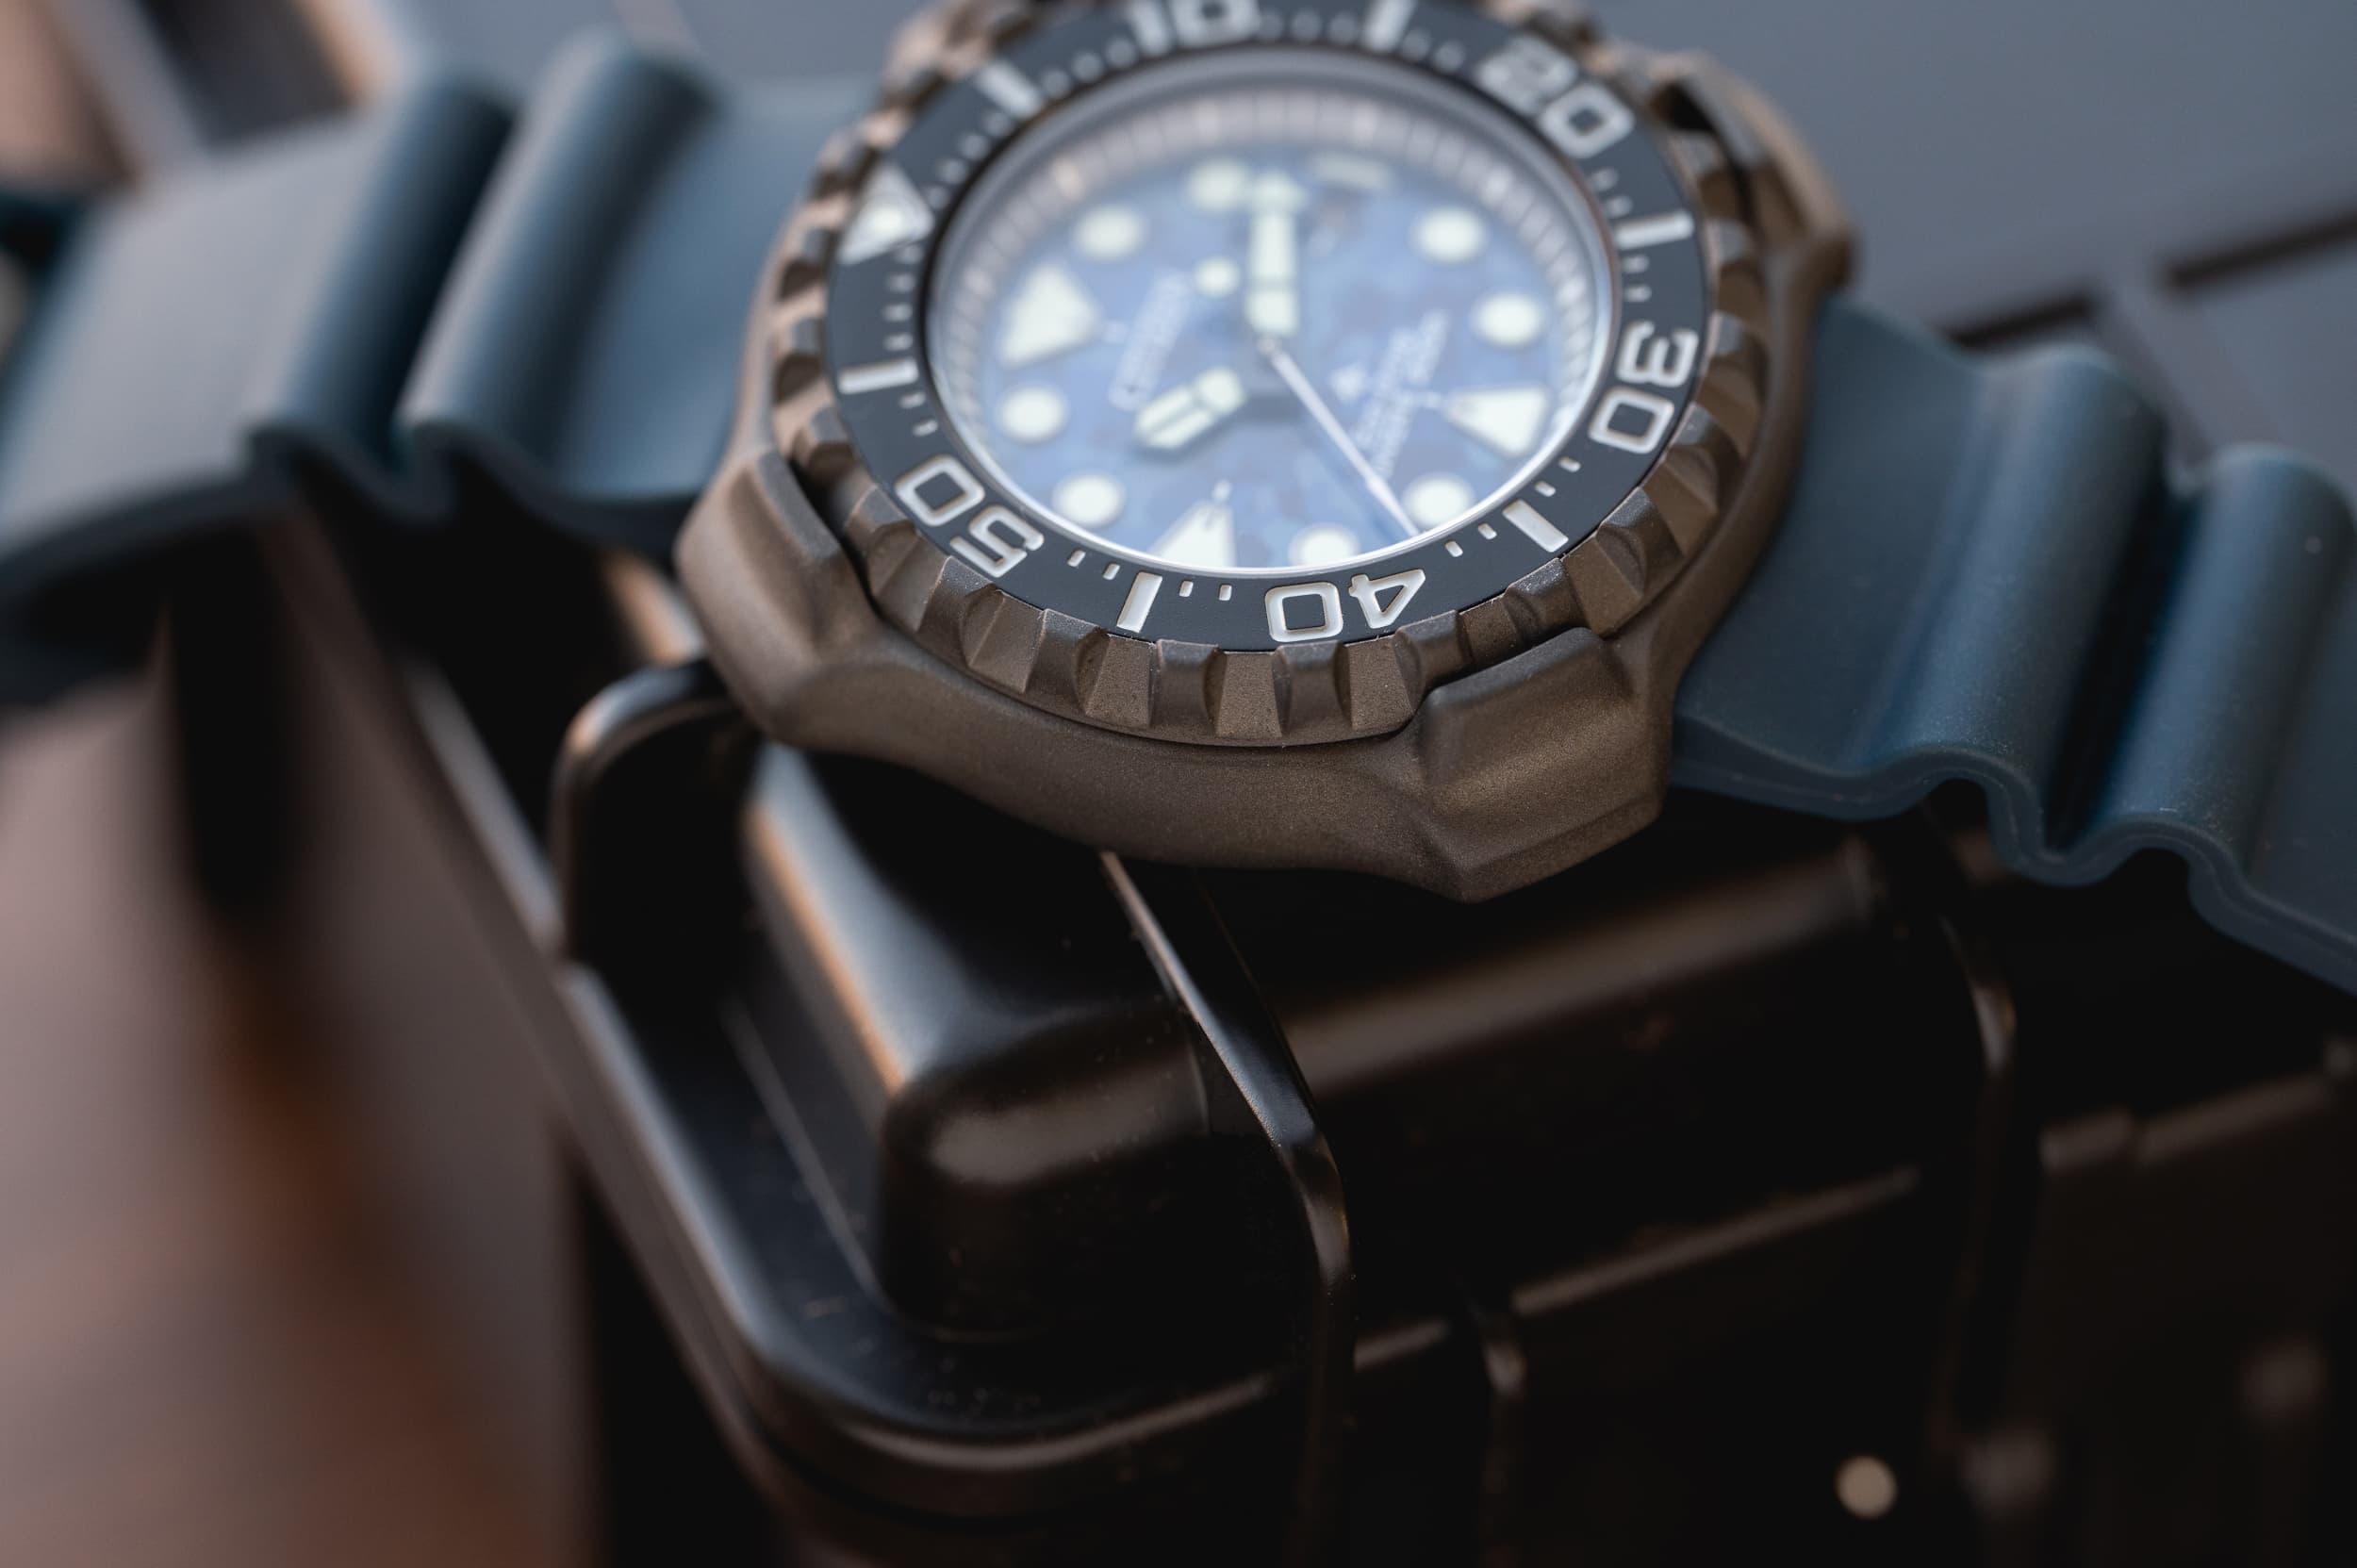 Review: The Assertive Yet Approachable Wound & BN0227-09L Diver Worn - Promaster Citizen